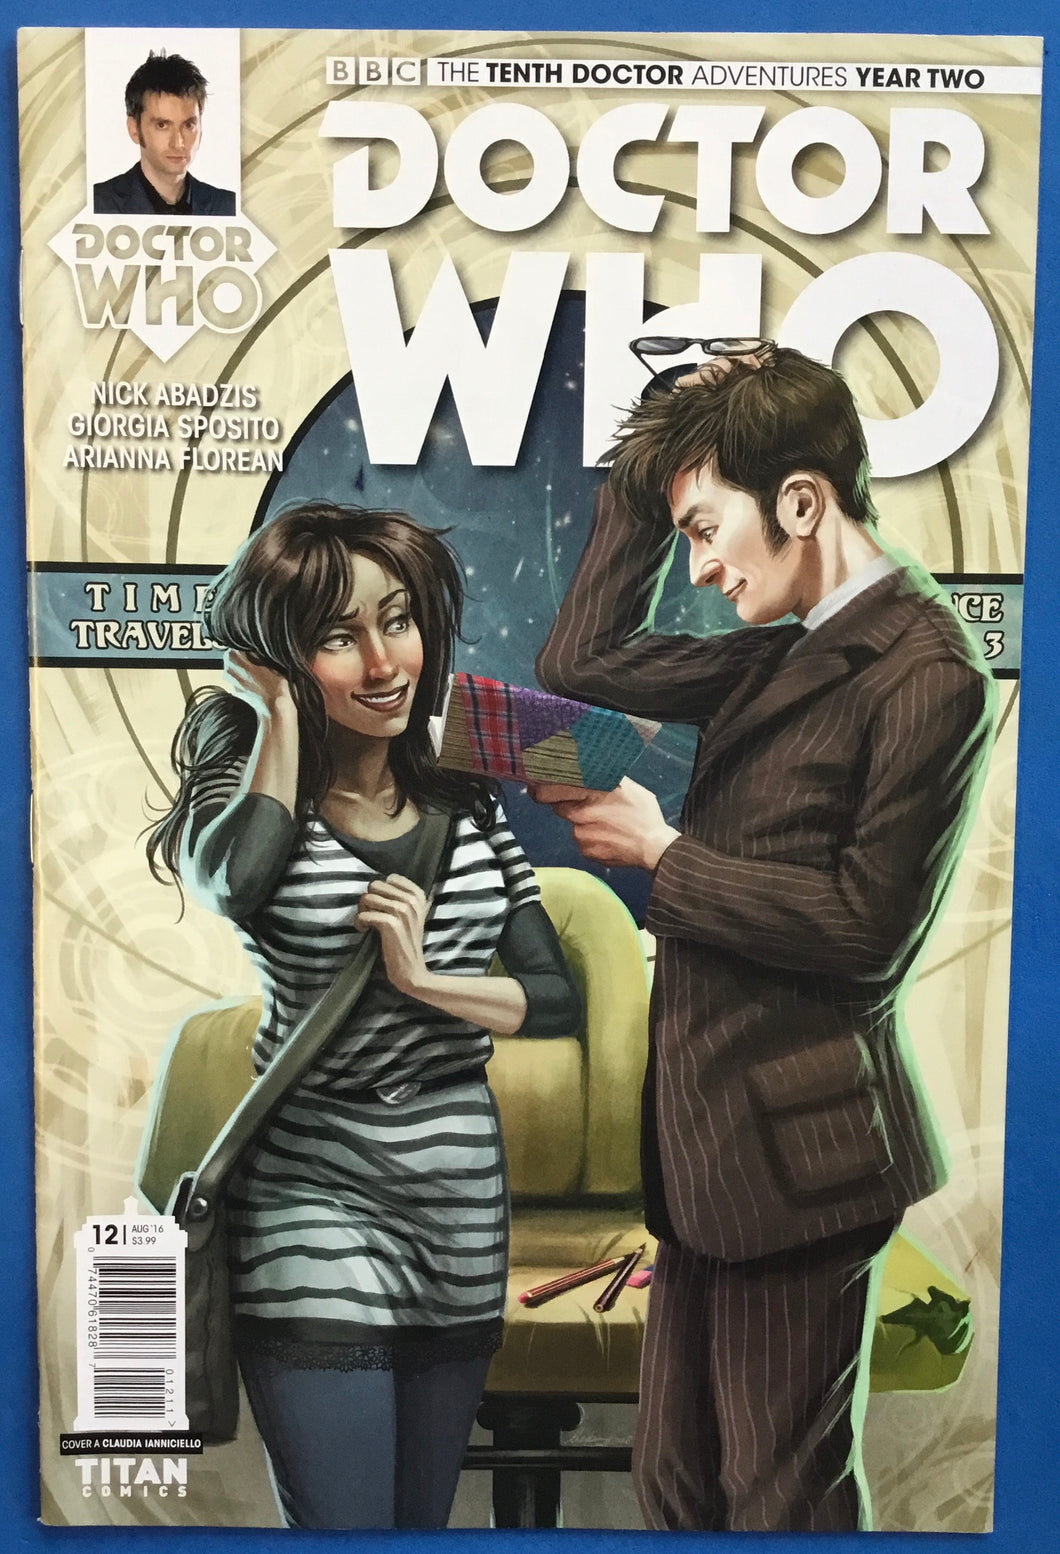 Doctor Who: The Tenth Doctor Year Two No. #12(A) 2016 Titan Comics